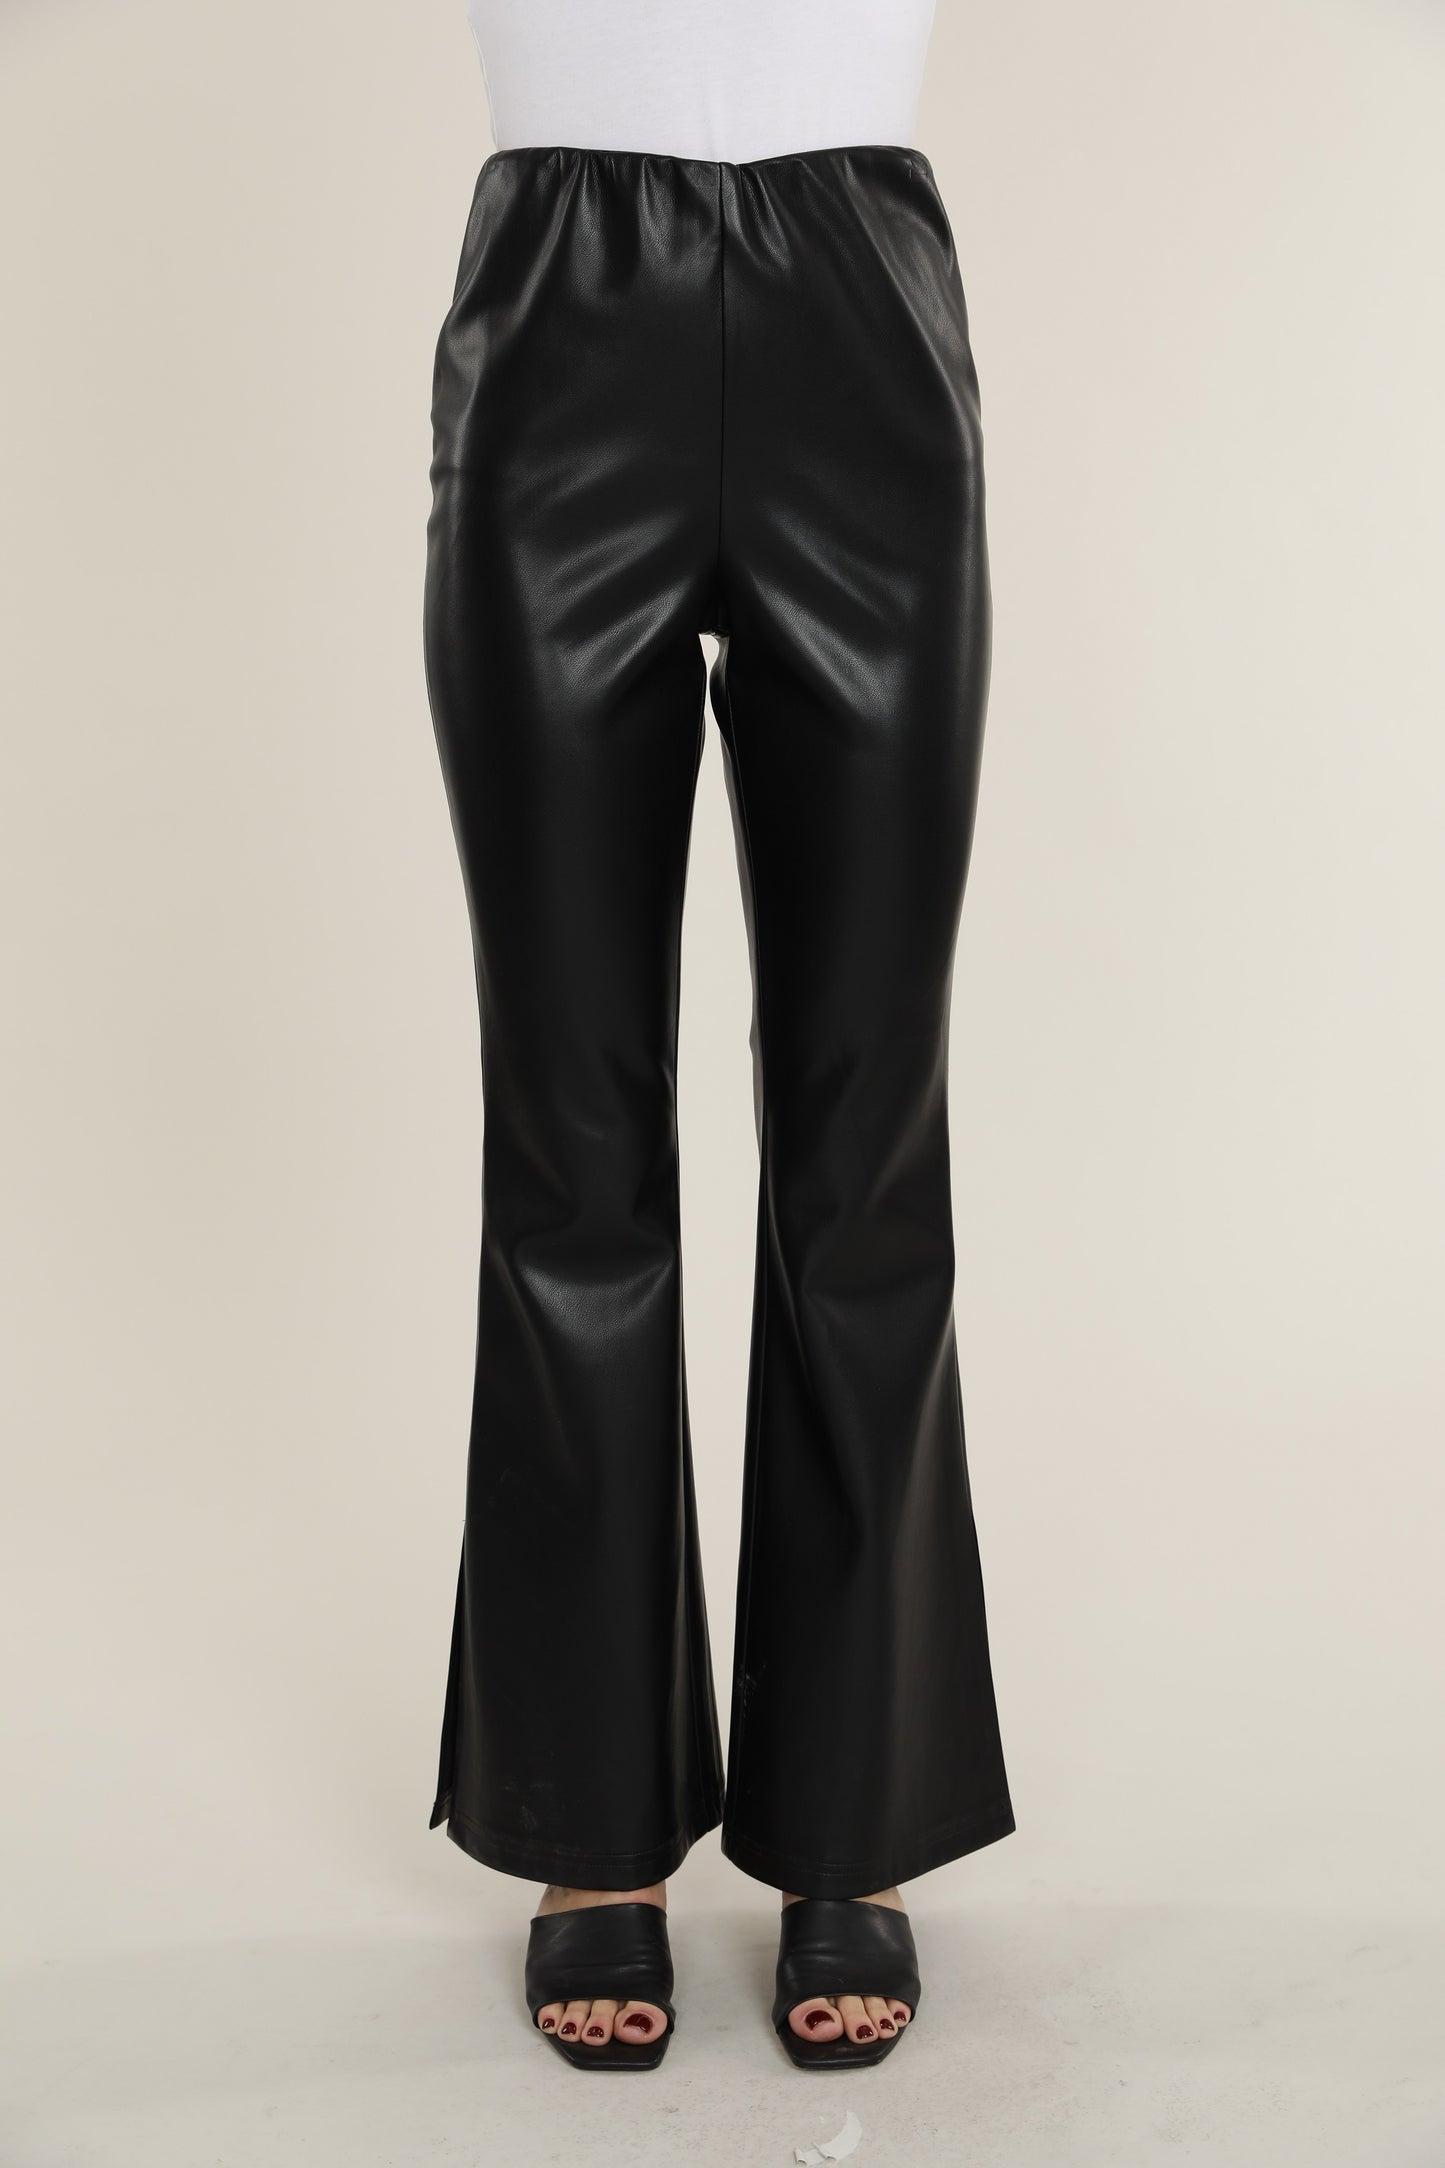 Black Faux Leather Slit Fit and Flare Pants